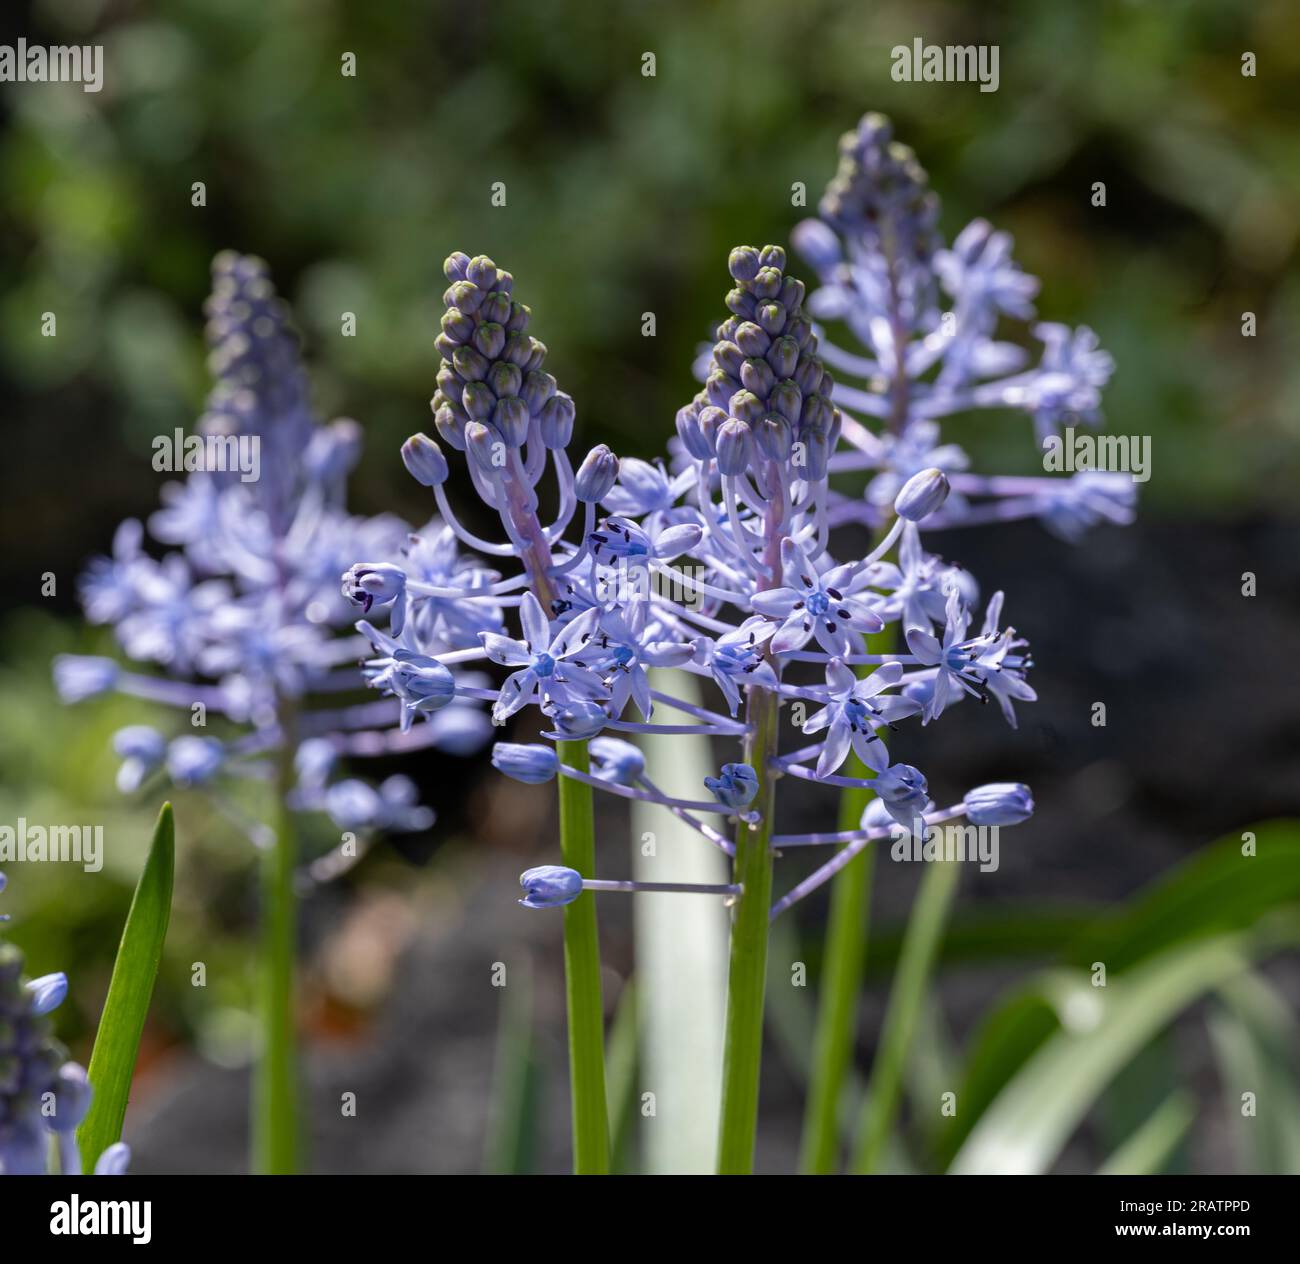 Hyacinth Squill light purple blooming flowers Stock Photo